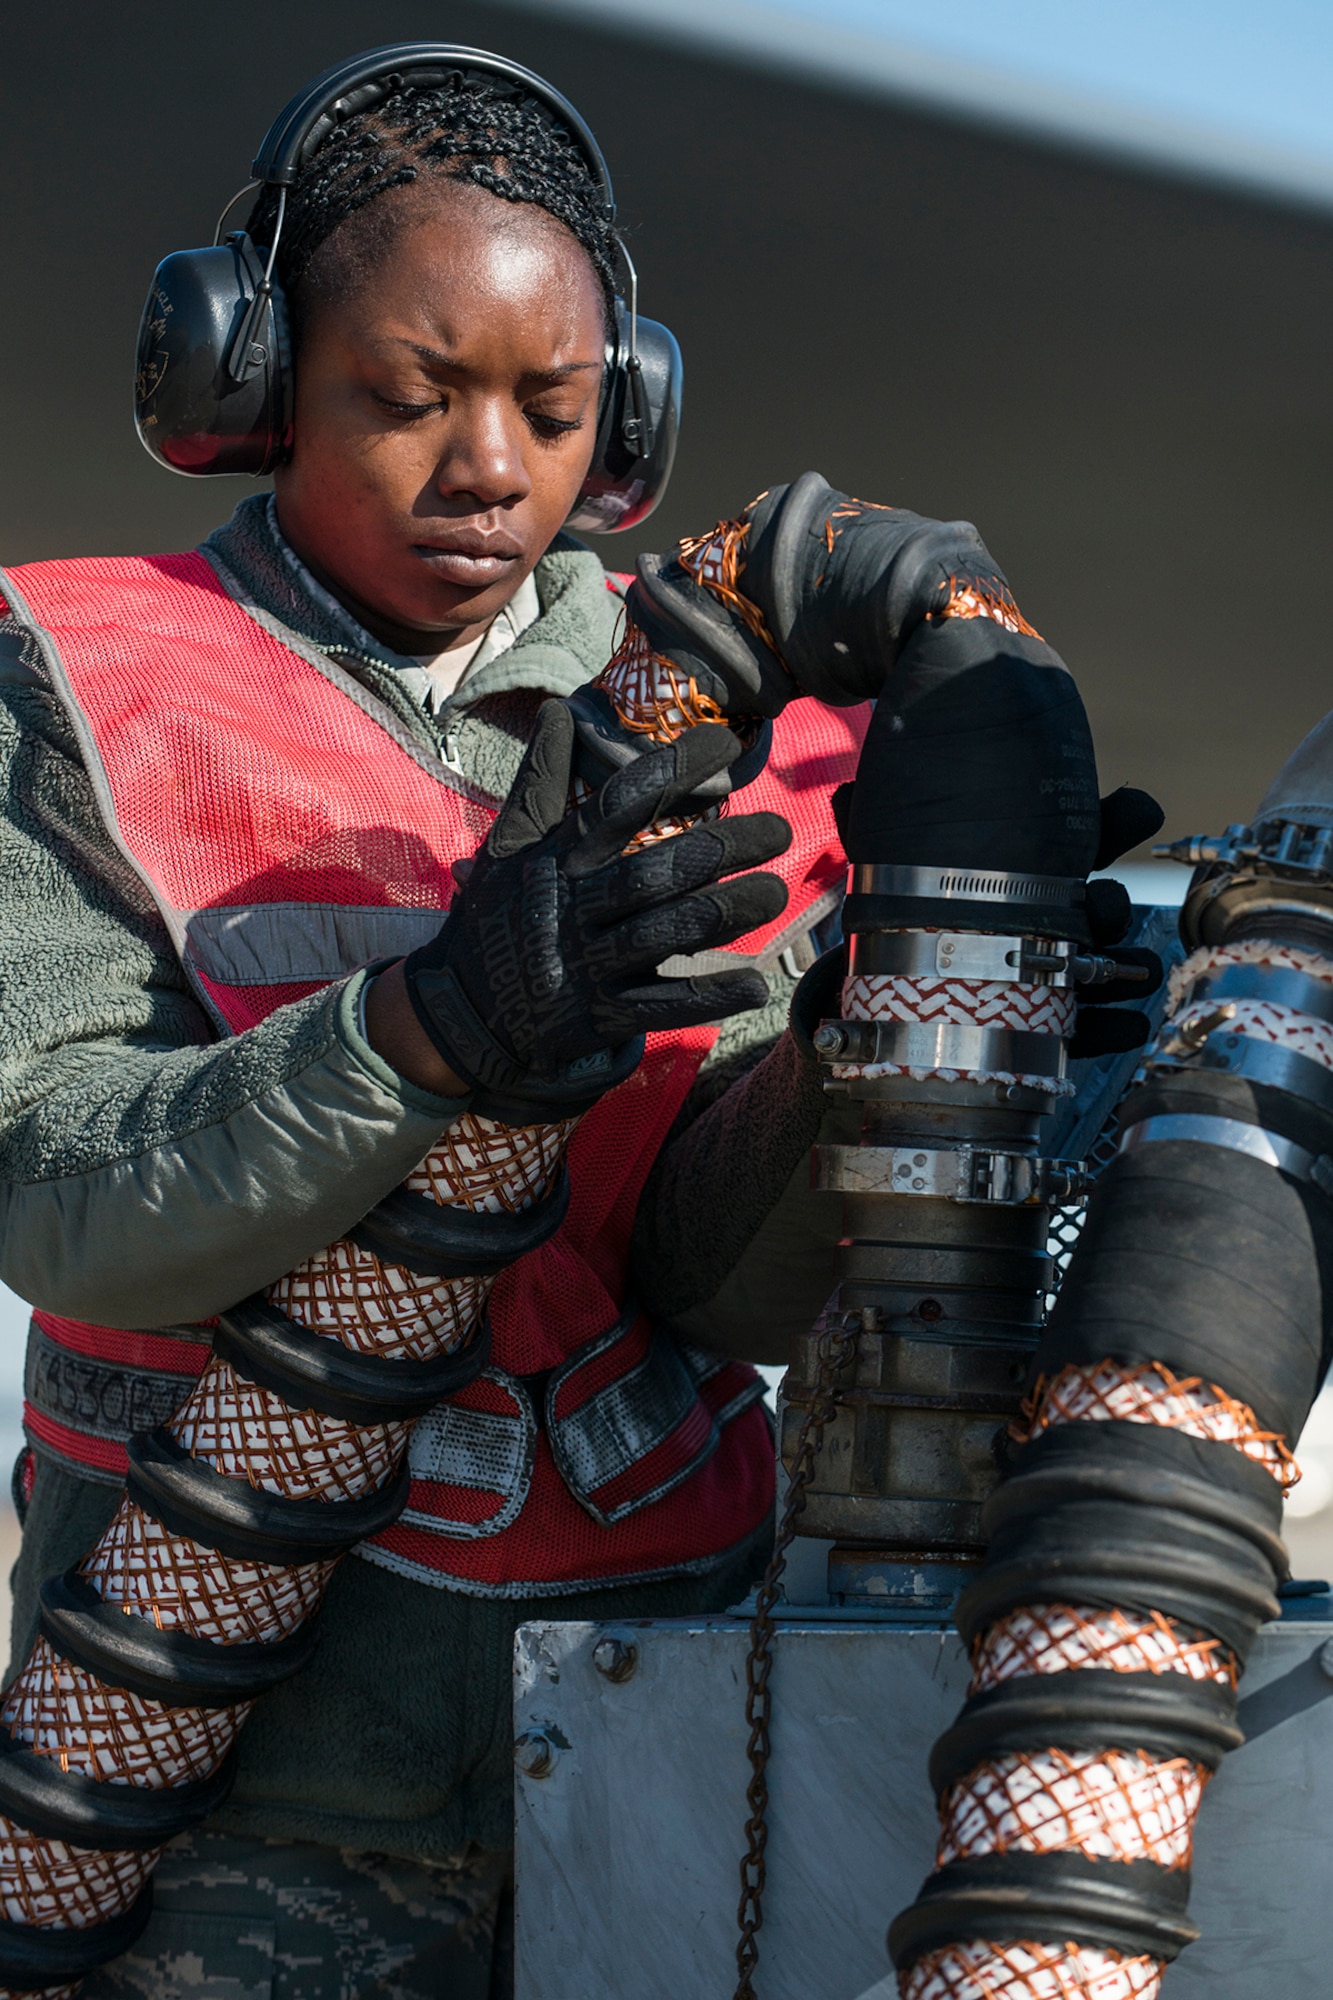 U.S. Air Force Tech. Sgt. Holly Guerra, assigned to the 307th Aircraft Maintenance Squadron, stows an air hose used to start engines on a B-52H Stratofortress on Mar. 22, 2013, Barksdale Air Force Base, La. In recognition of Women’s History Month, the Air Force Reserve Command’s 307th Bomb Wing and Barksdale’s 2nd Bomb Wing launched two B-52H Stratofortress bombers flown by two all-female aircrews made up from members of the Air Force Reserve Command’s 93rd and 343rd Bomb Squadrons and the 2nd Bomb Wing’s 11th, 20th and 96th Bomb Squadrons. (U.S. Air Force photo by Master Sgt. Greg Steele/Released)